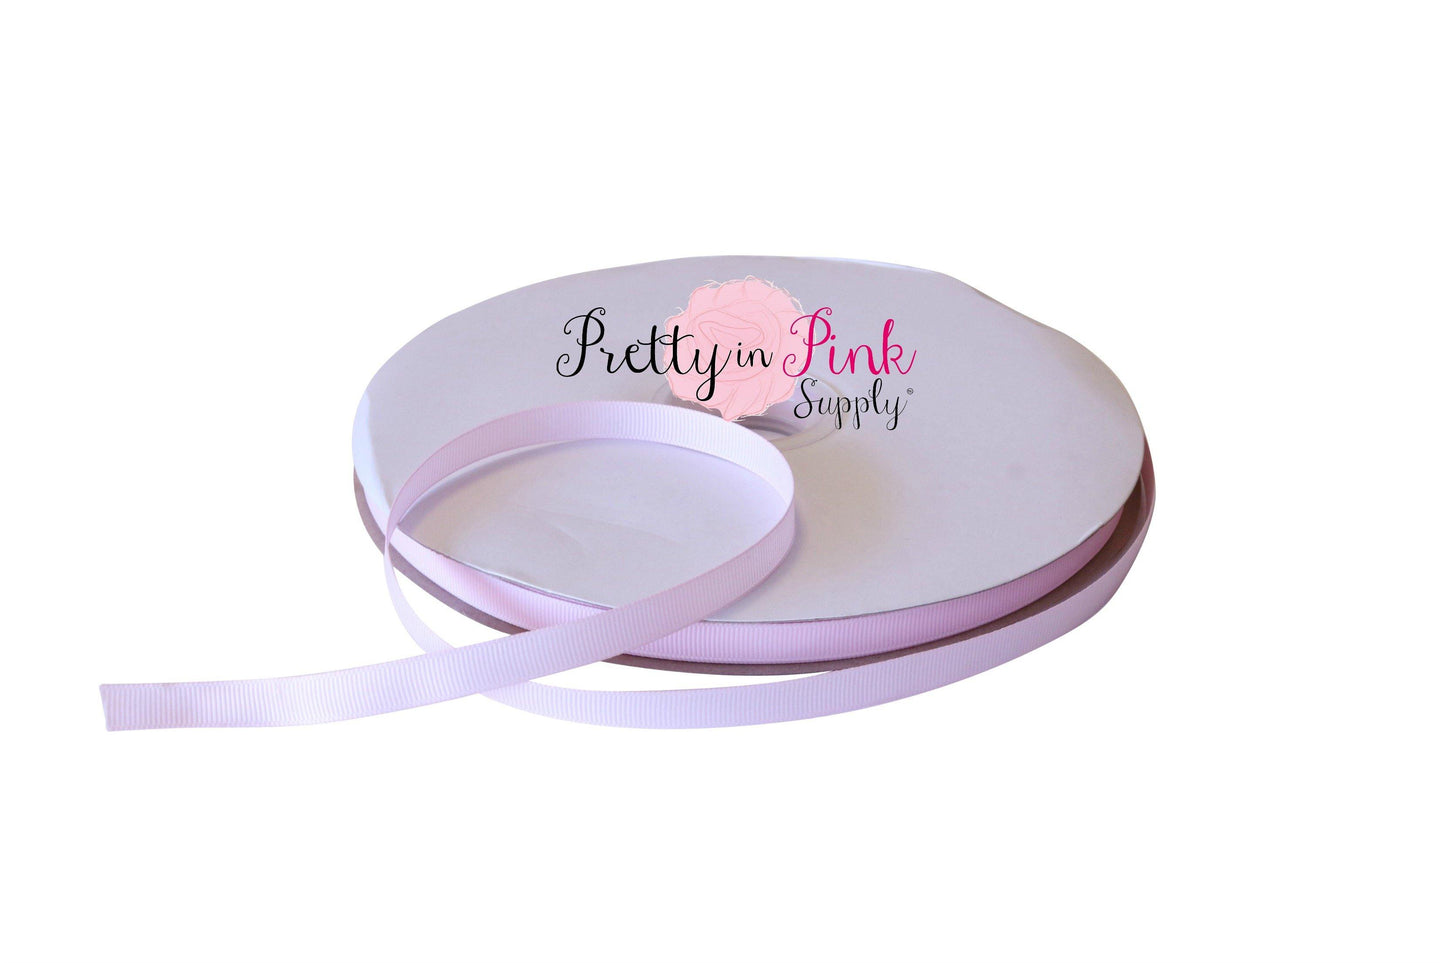 3/8" Pale Pink Grosgrain Ribbon - Pretty in Pink Supply